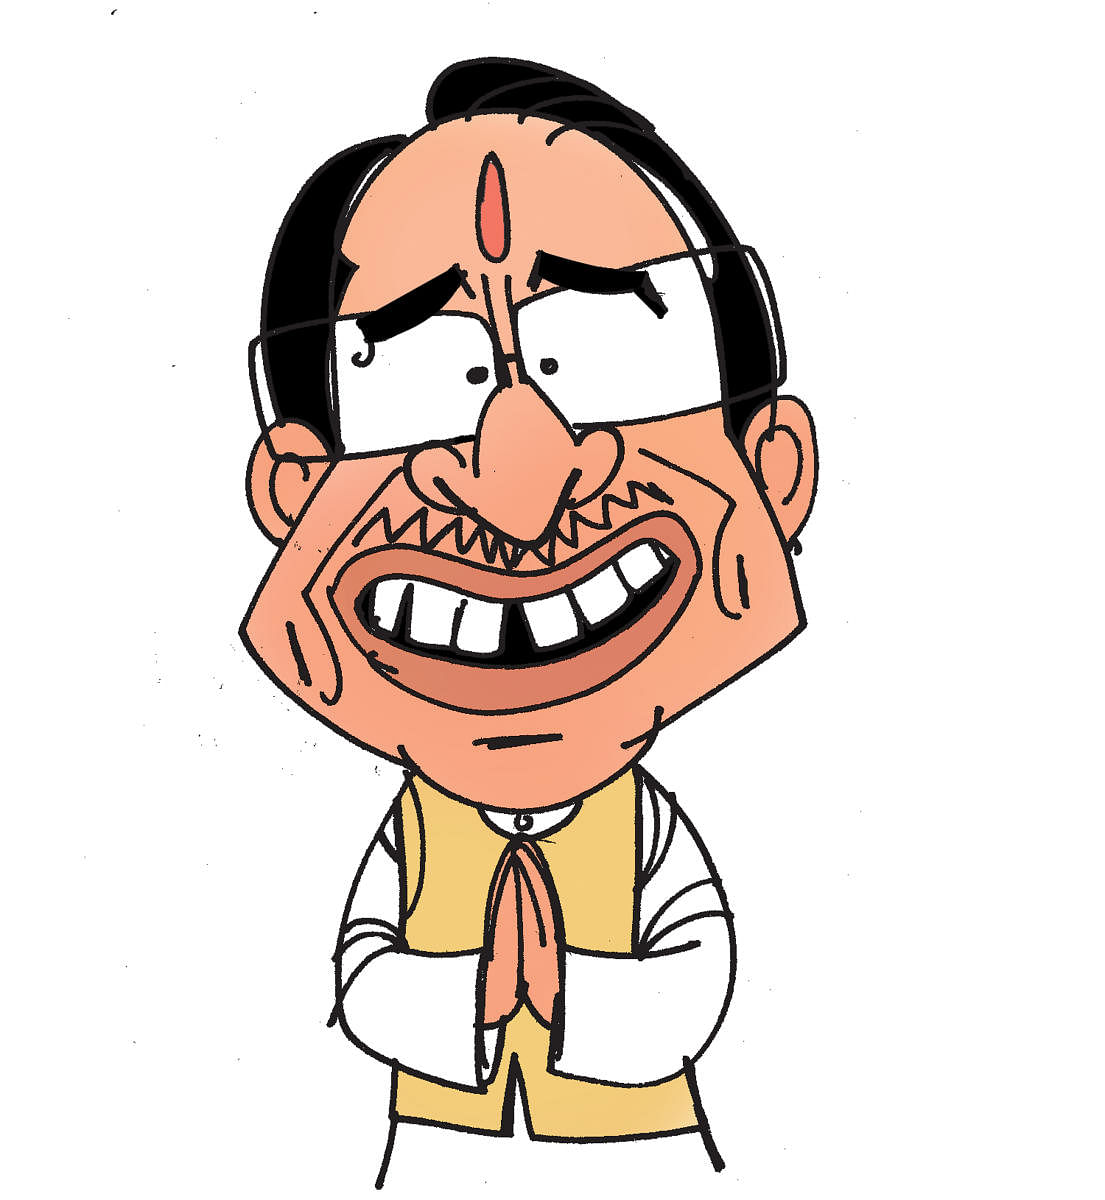 Shivraj Singh Chouhan is ranked 13th in the 16-member state election management committee formed for the Lok Sabha election.